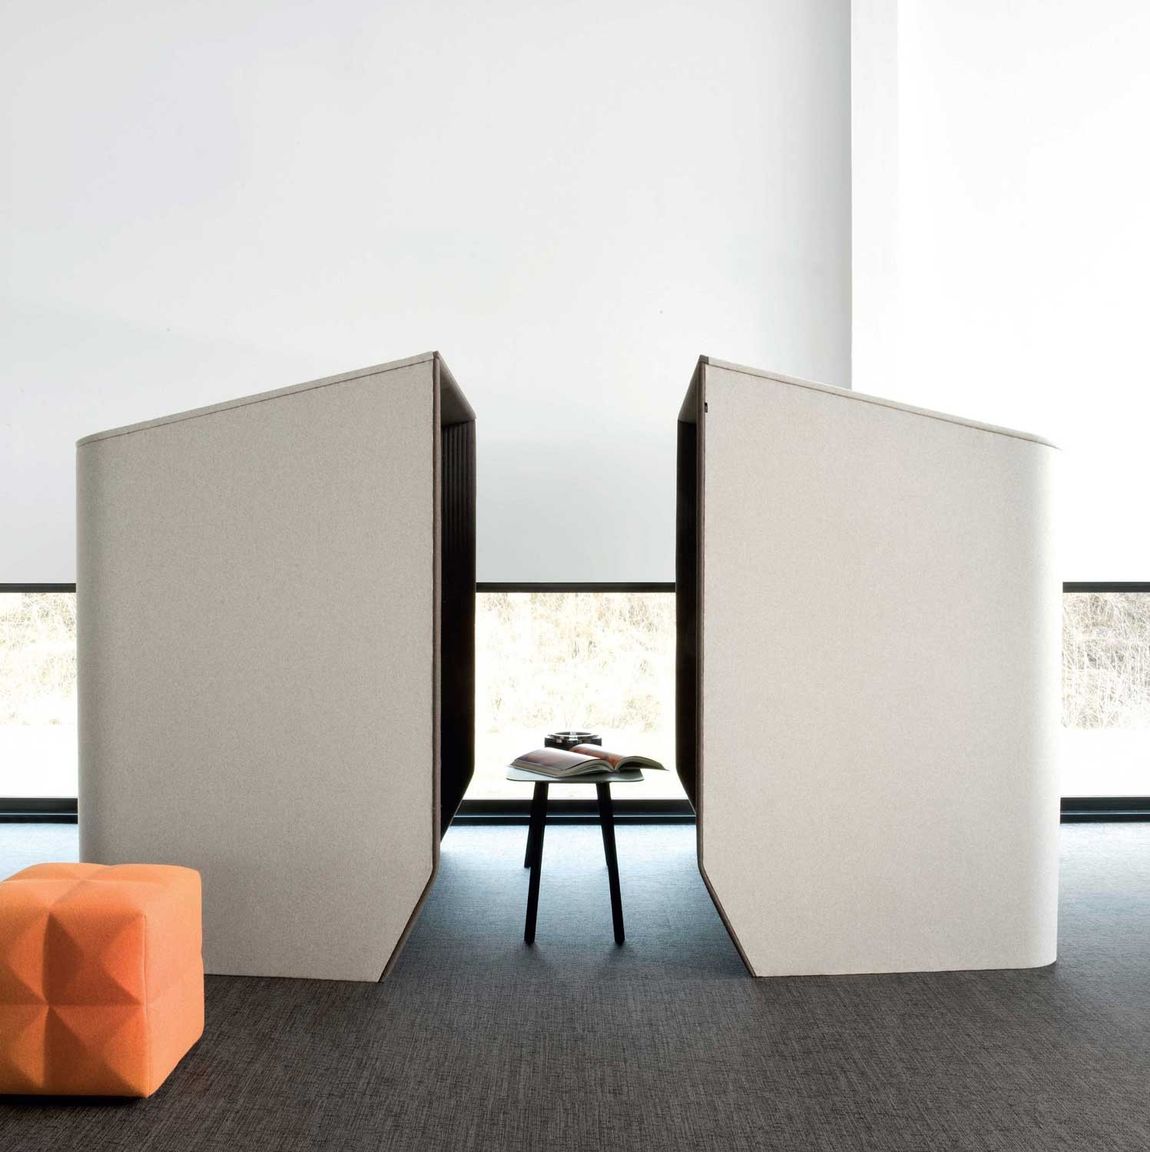 Acoustic Office Furniture - Collaborative Brainstorming Pods